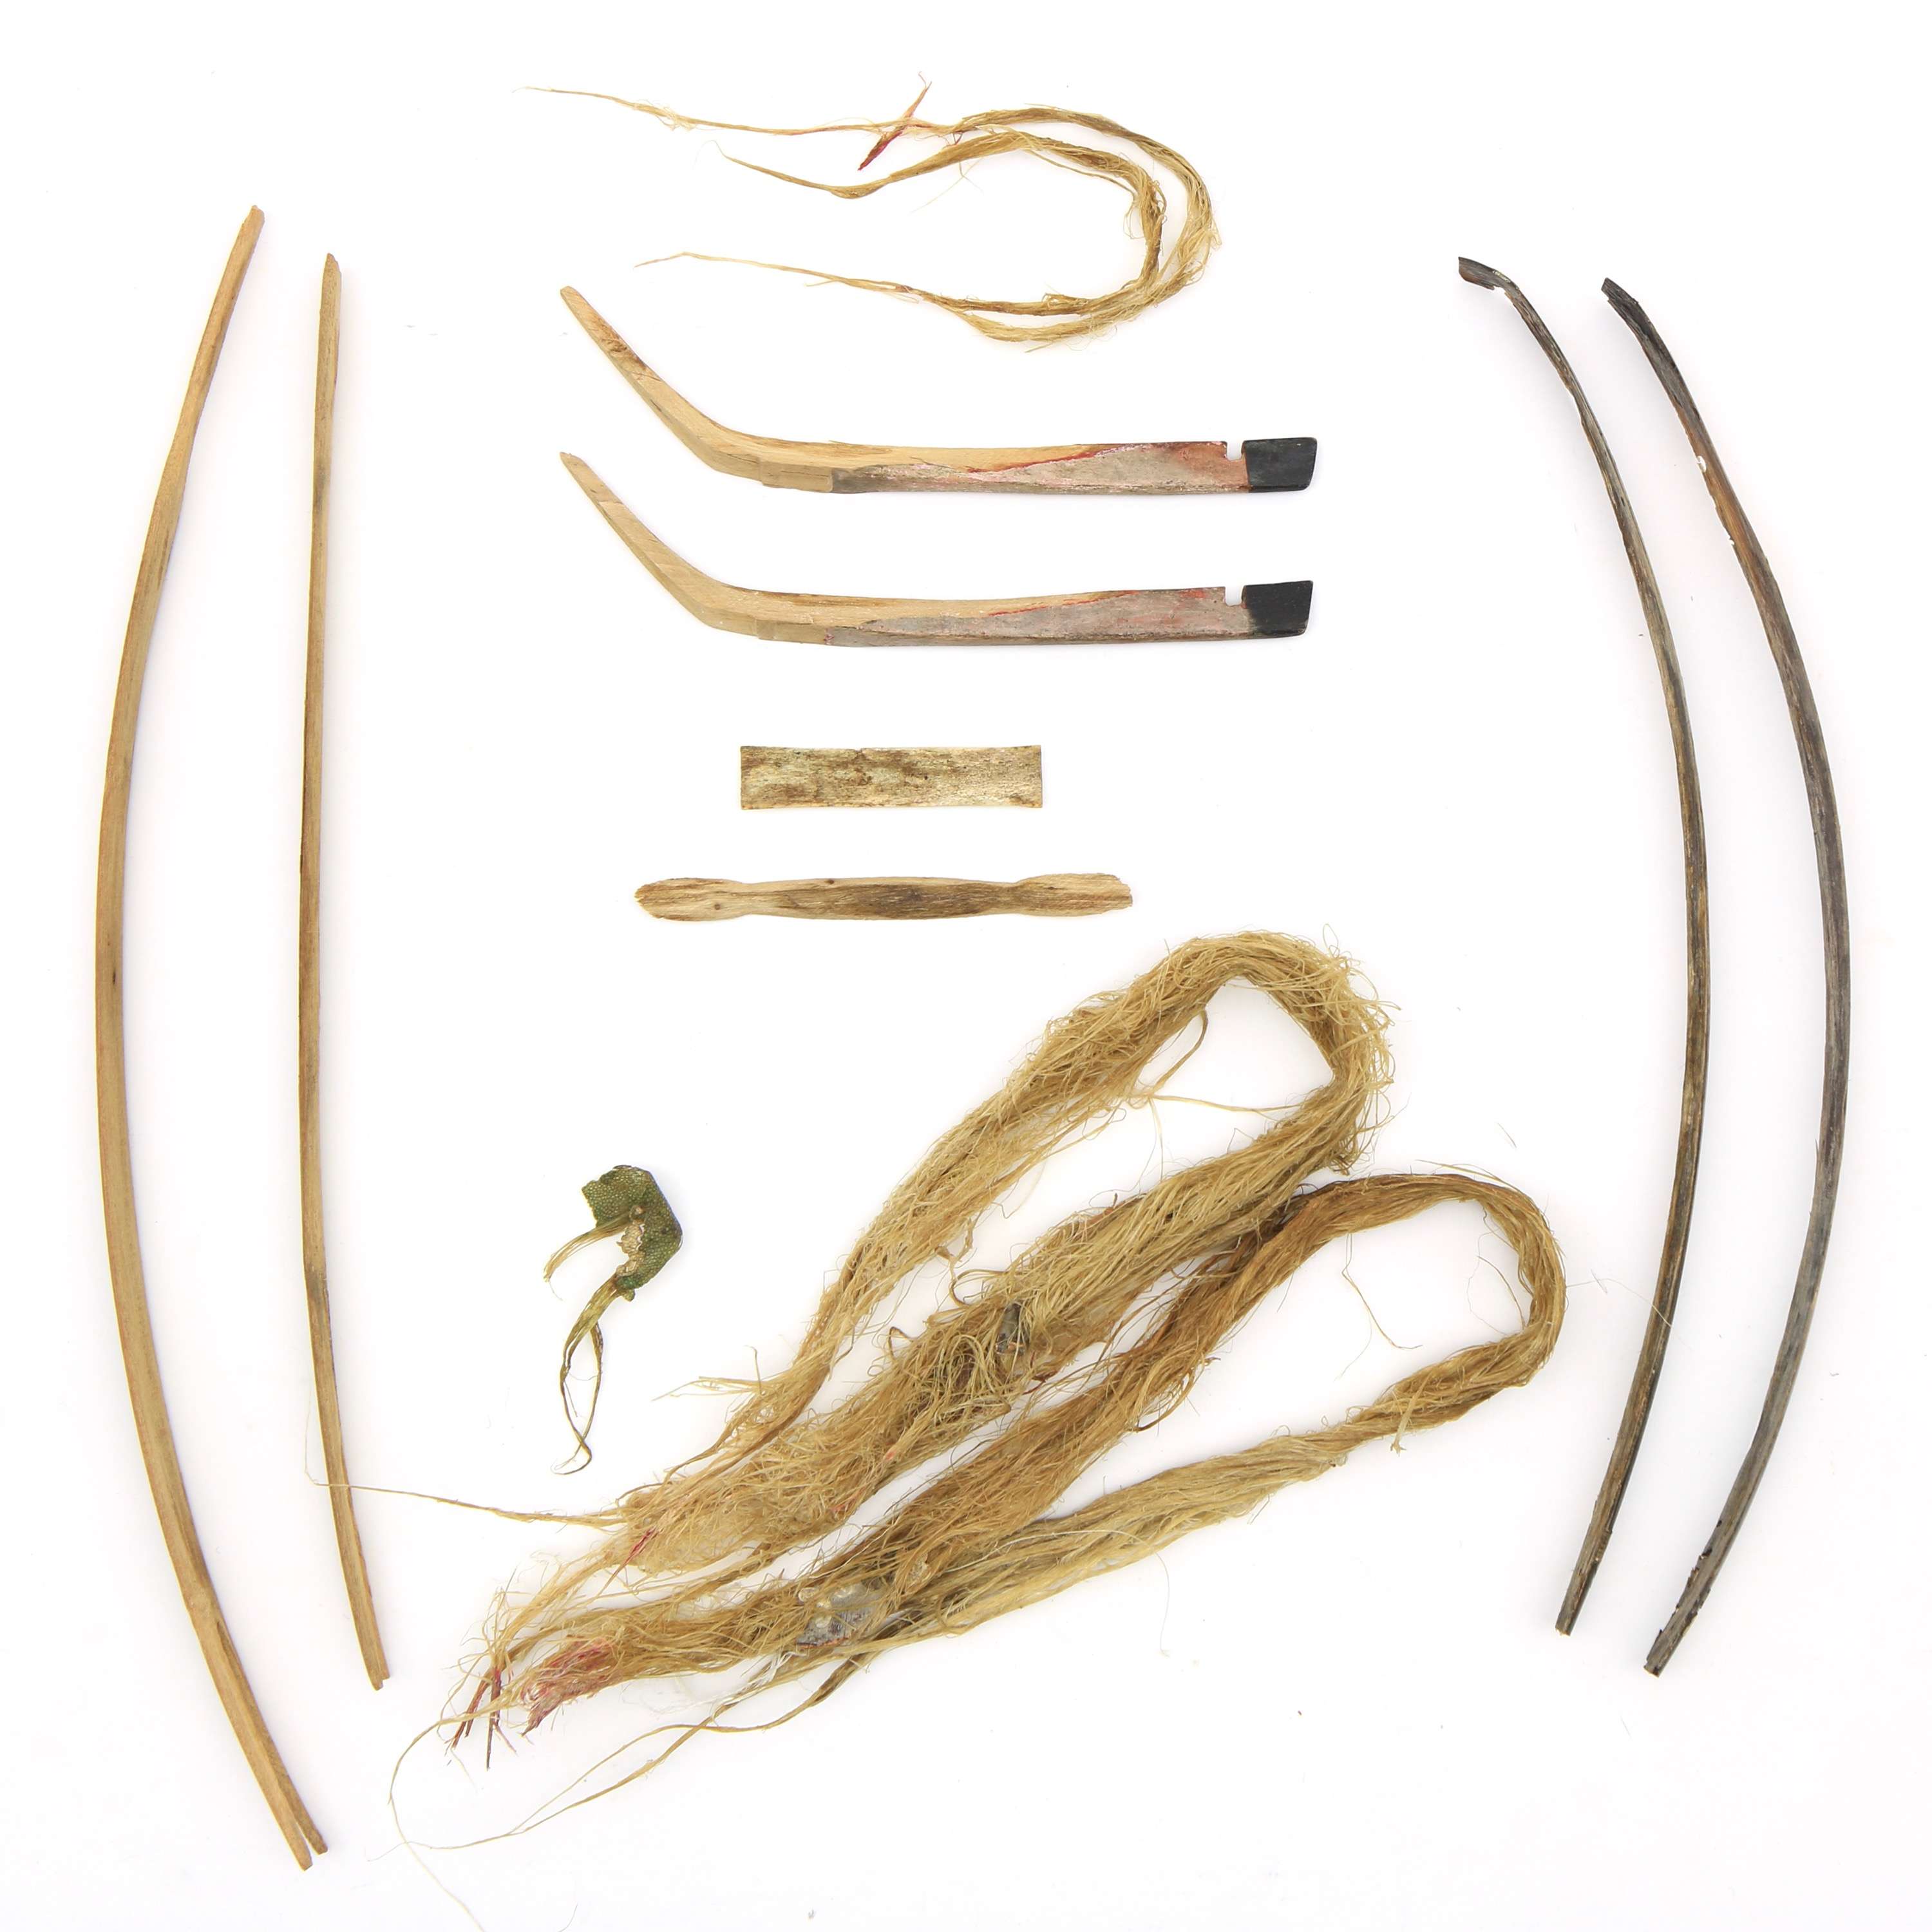 A deconstructed Qing bow